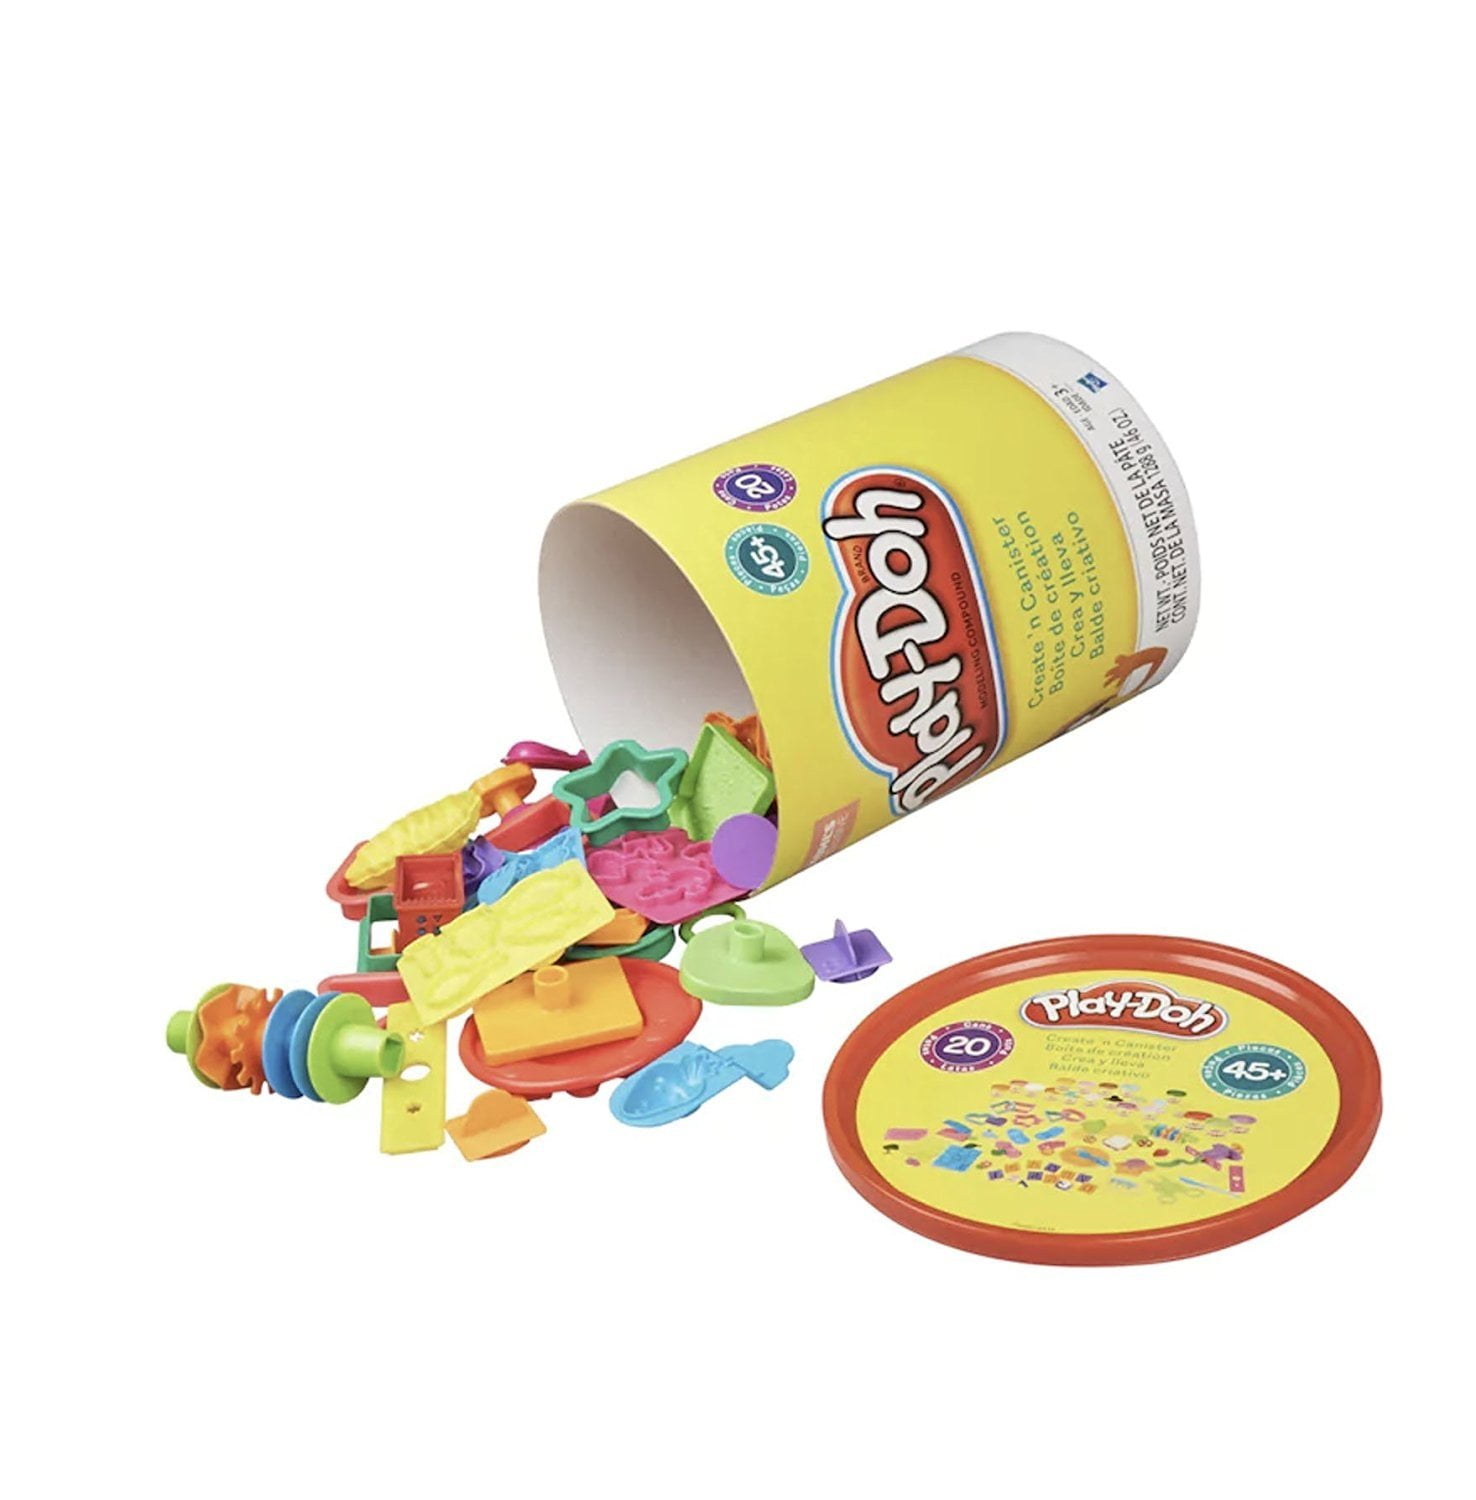 NEW Hasbro Play-Doh Create 'n Canister 20 Cans 45 Pieces Kids Creativity Gift! 